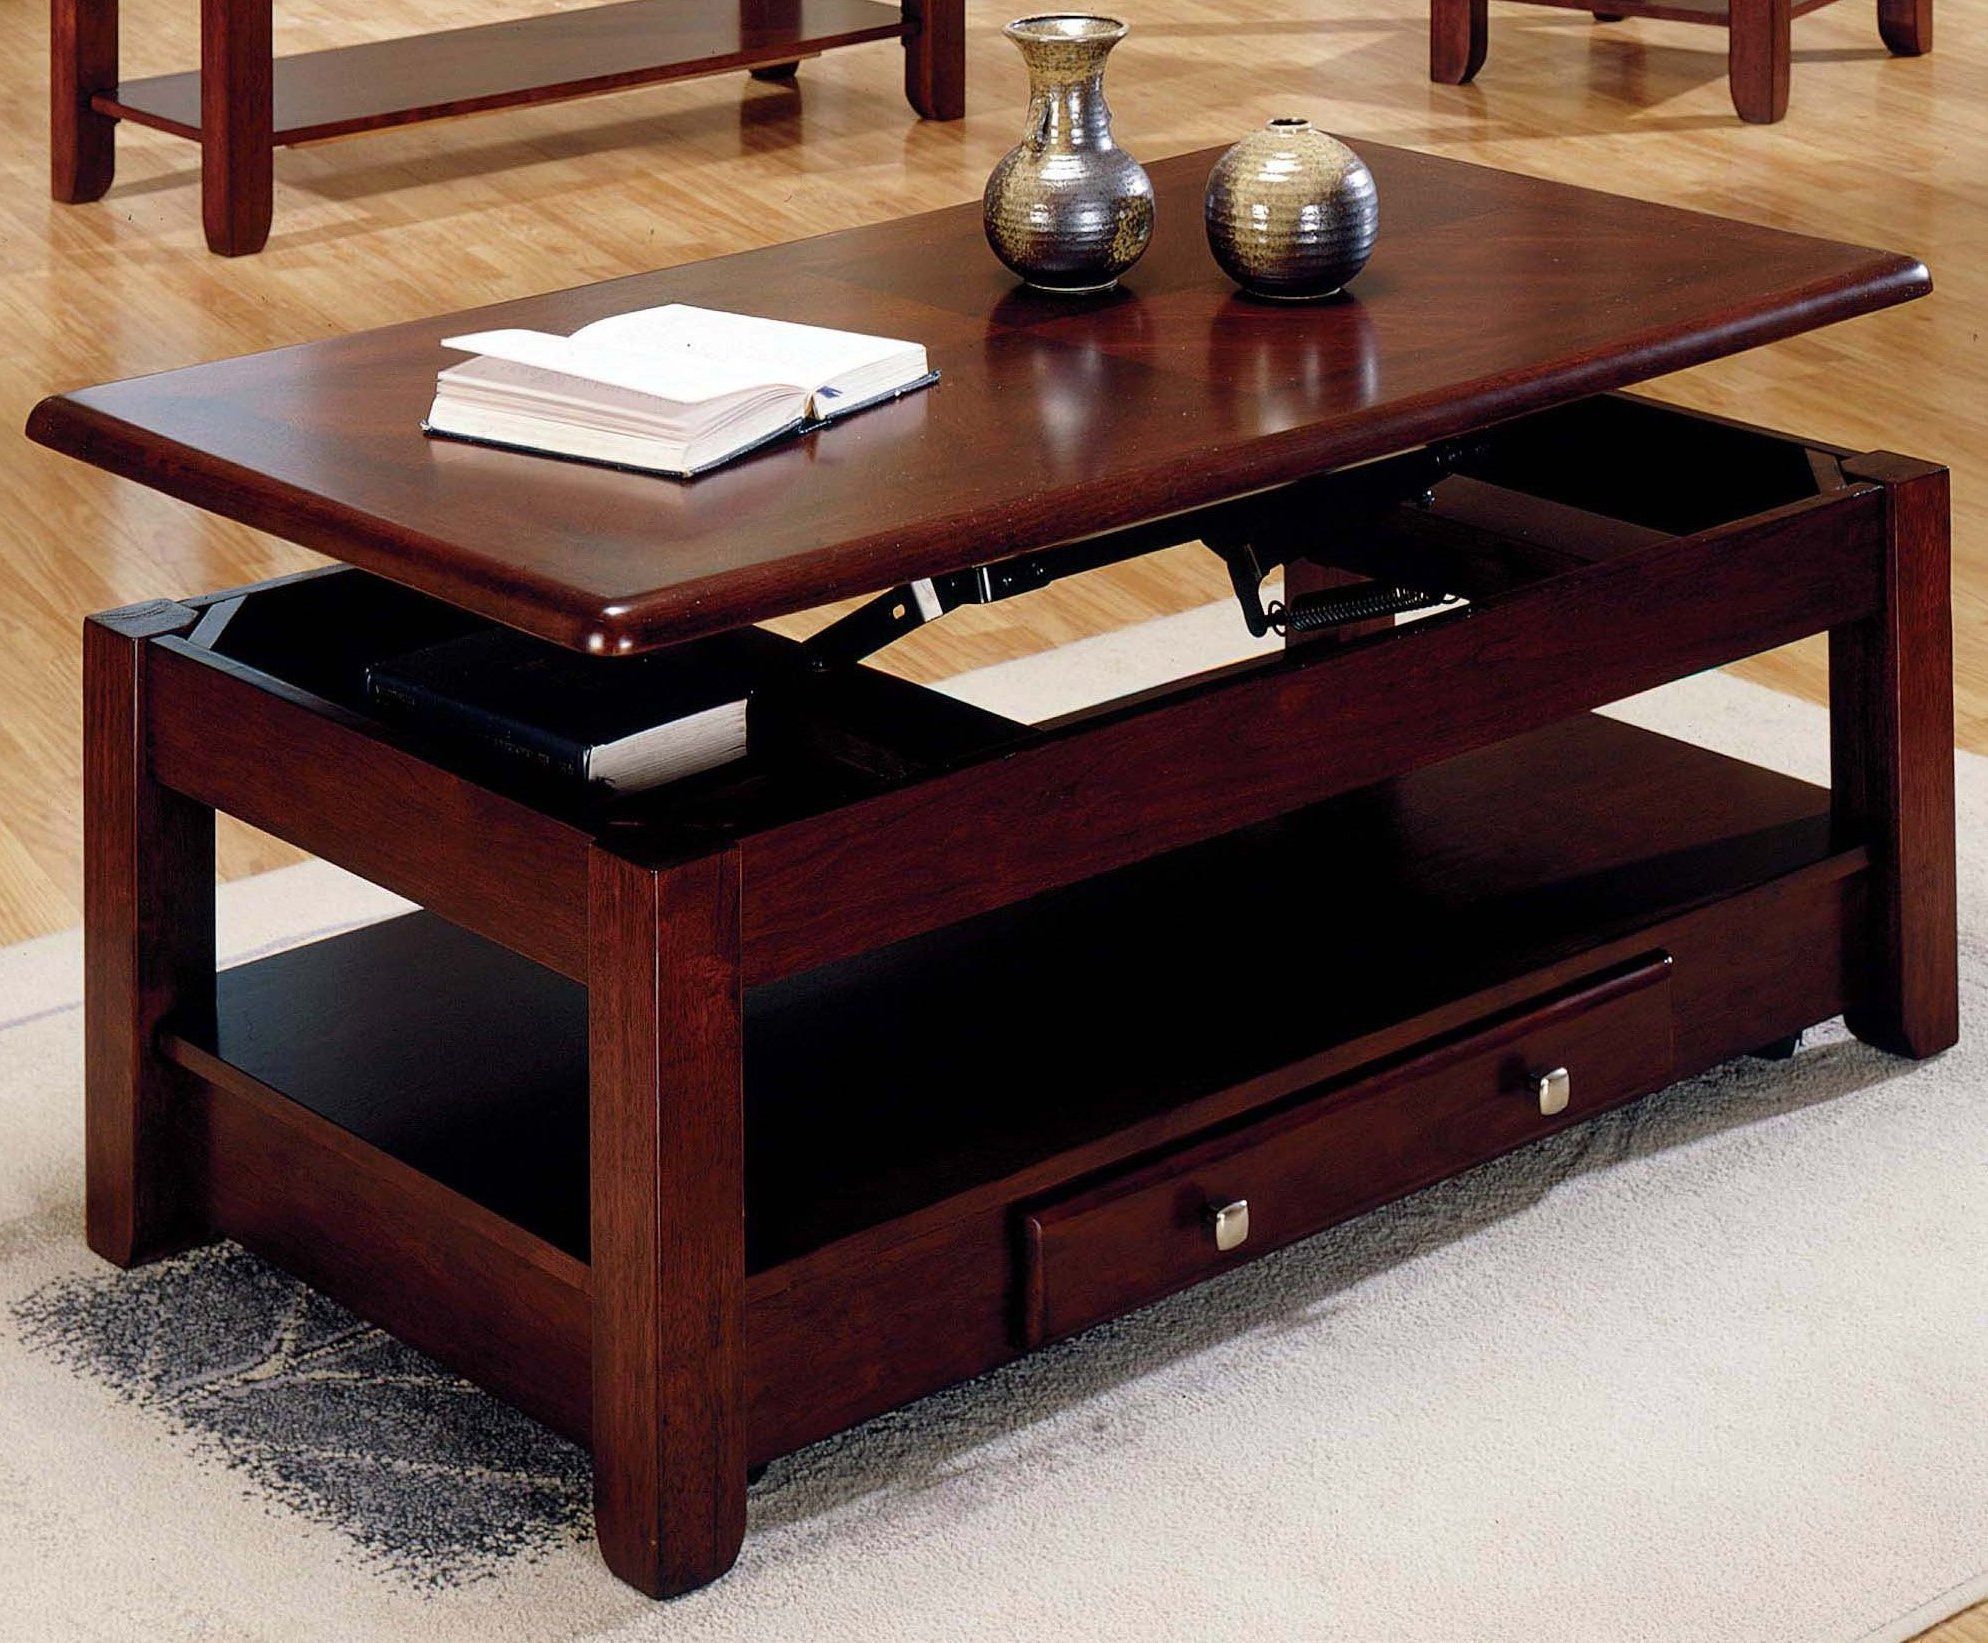 Cherry Wood Coffee Table Design Images Photos Pictures For Wood Lift Top Coffee Tables (Gallery 1 of 20)